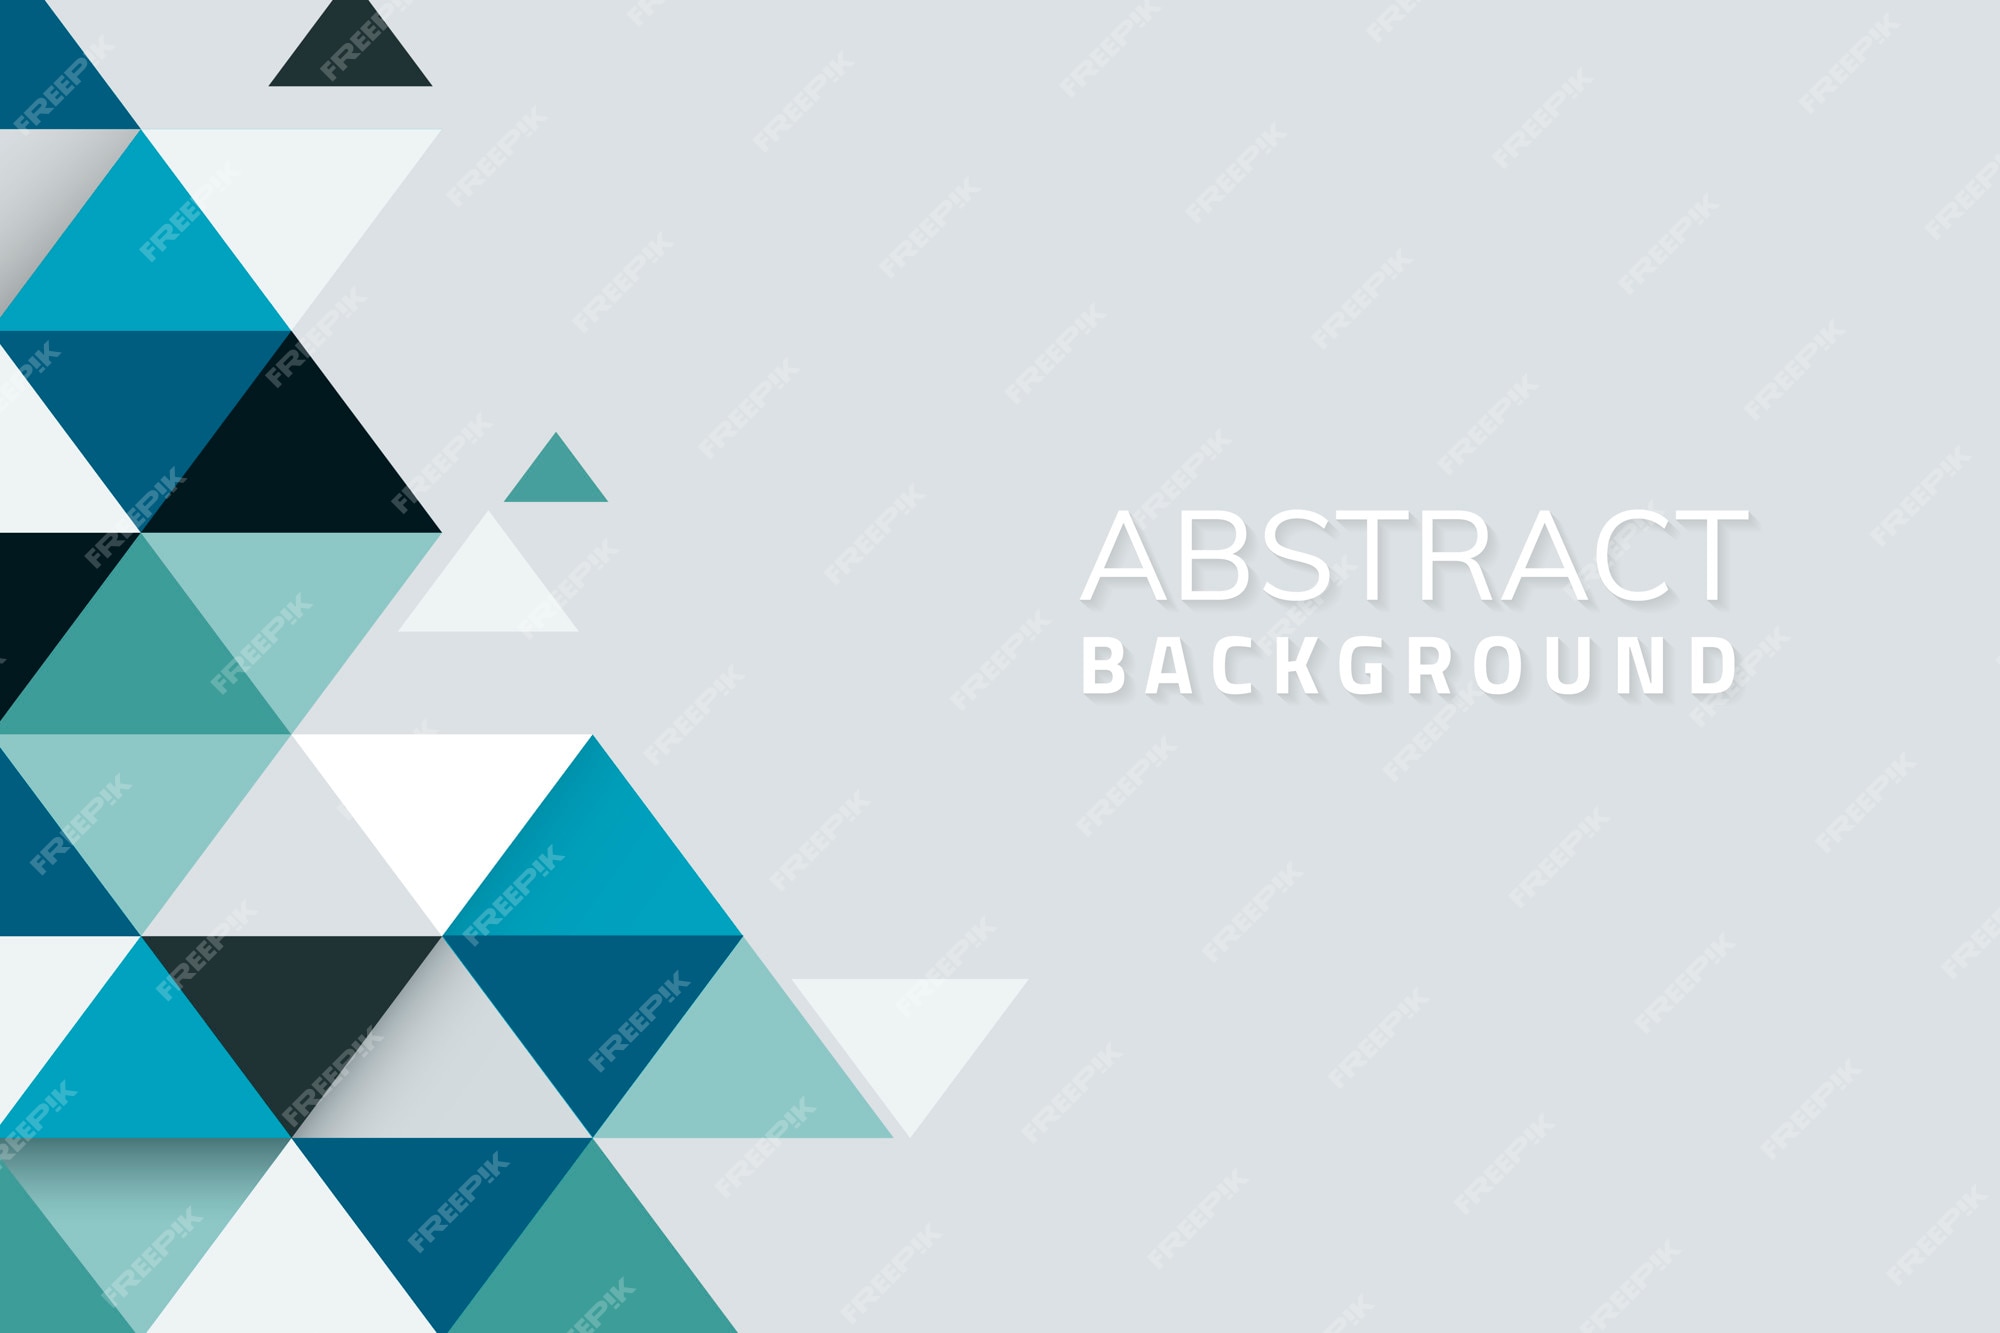 Triangle Background Images - Free Download on Freepik